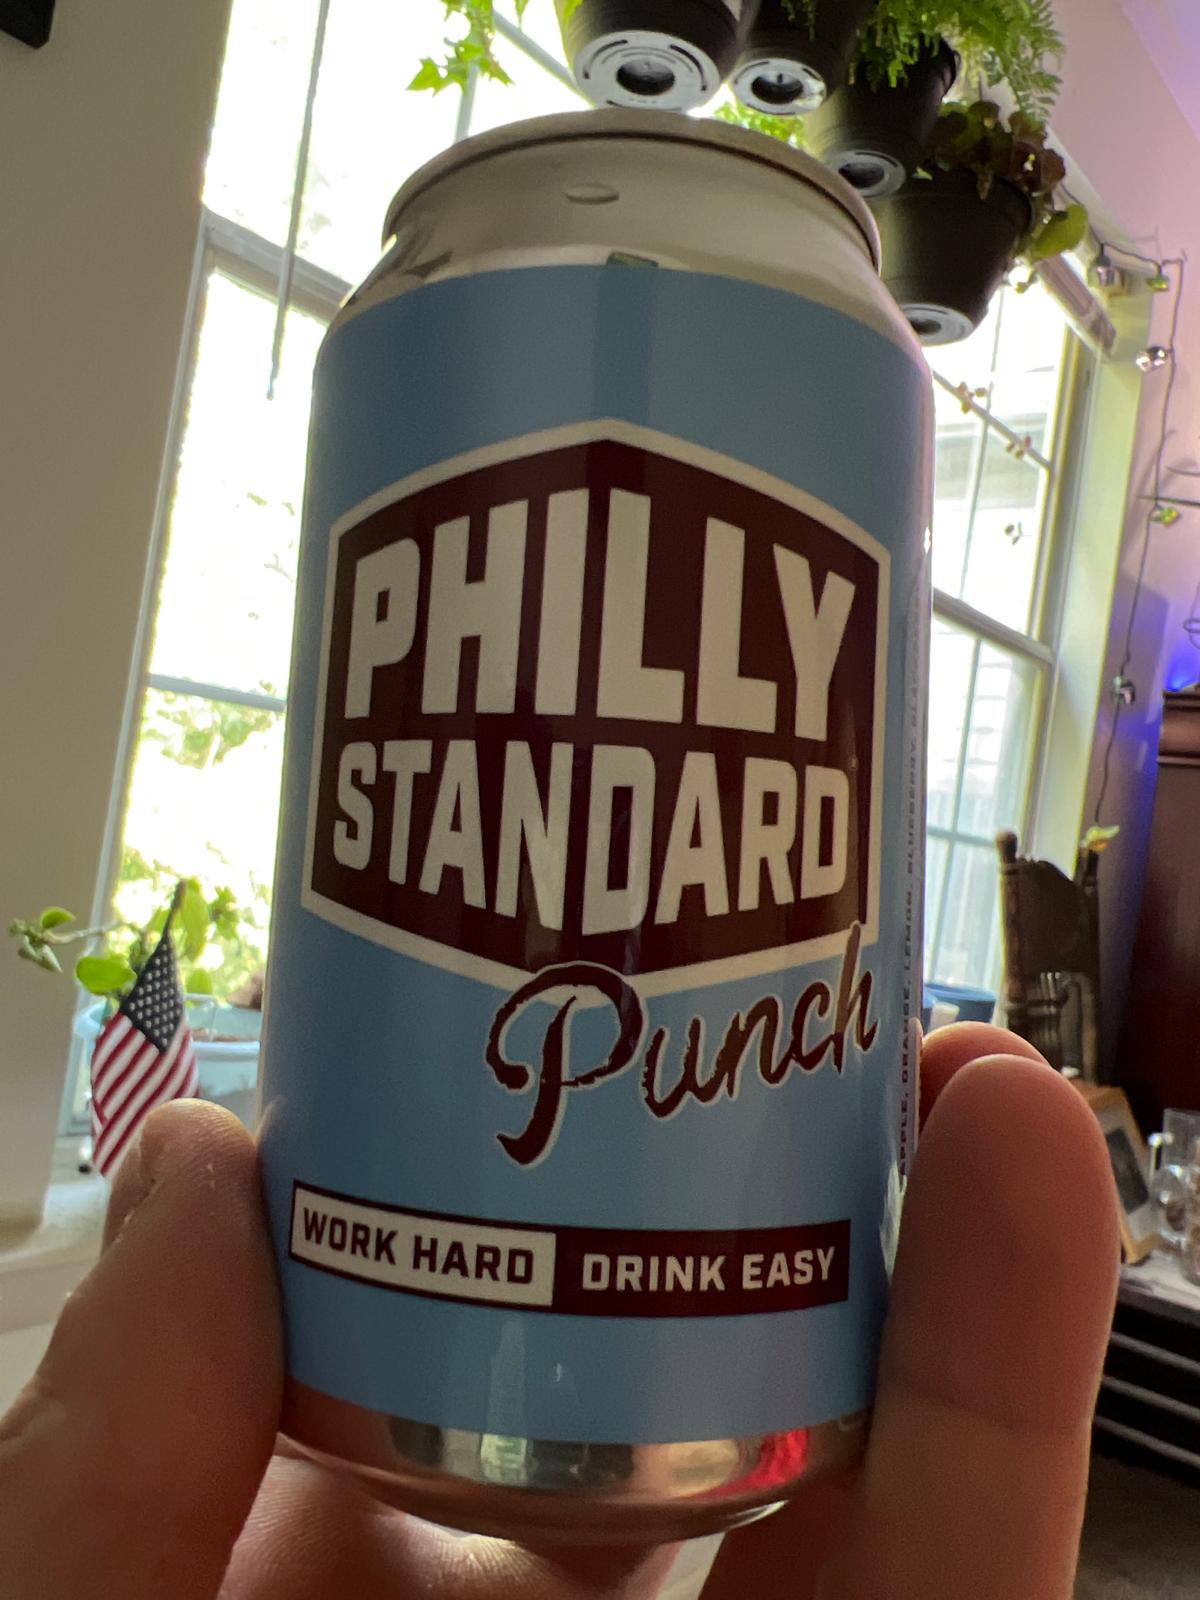 Philly Standard Punch